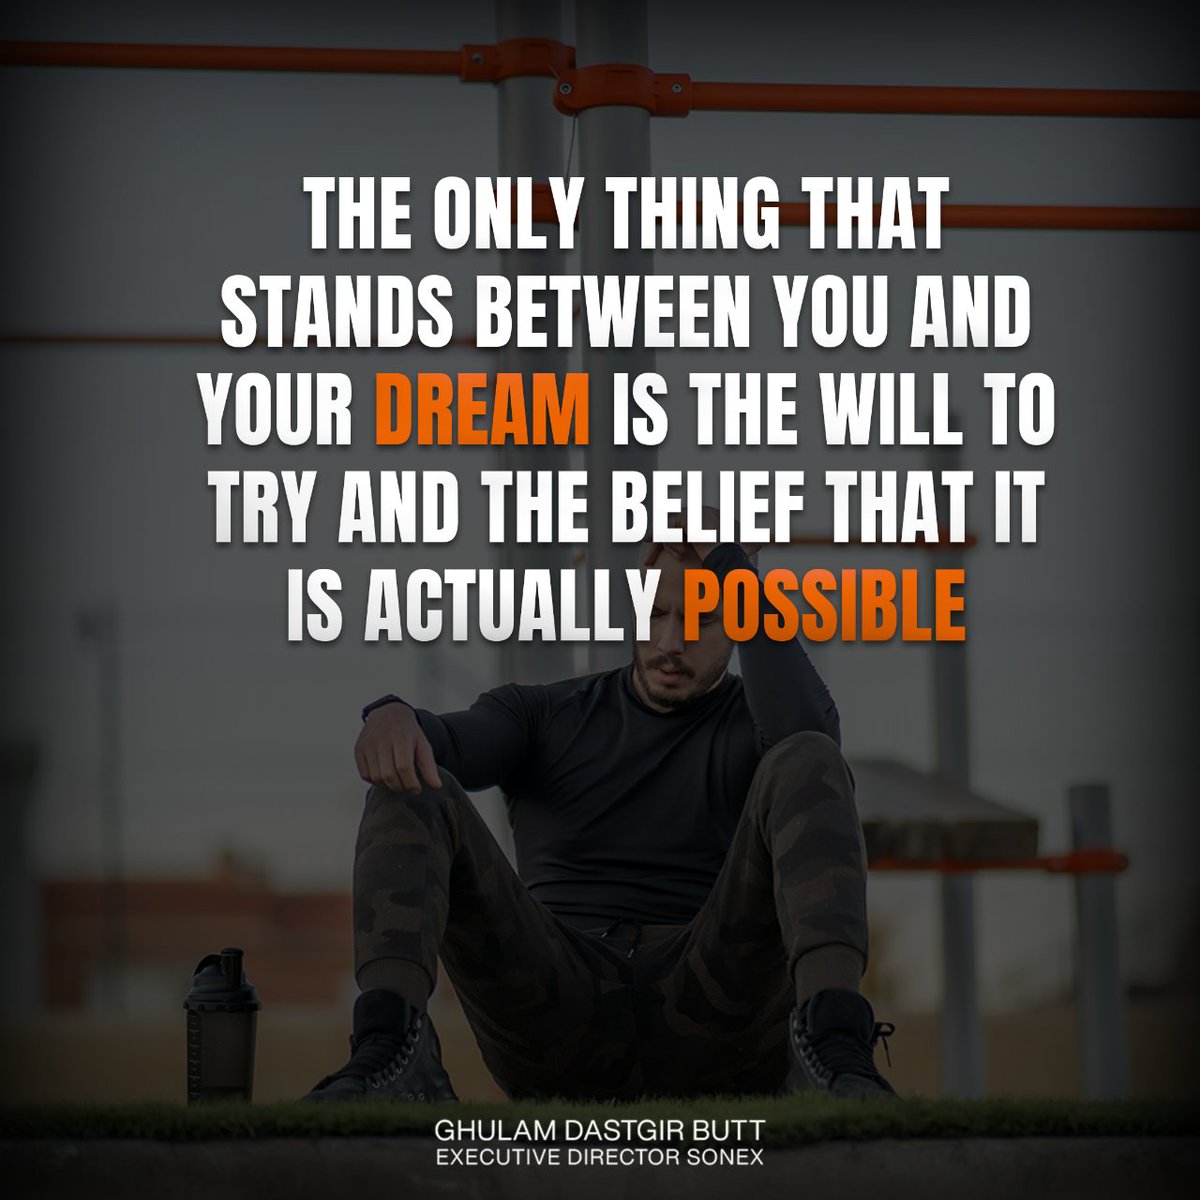 The only obstacle between you and your dream is the determination to try and the belief in its possibility.

#GhulamDastgirButt #youngentrepreneur #leadership #motivation #risktaker #journey #challenge #success #SelfDesign #YouAreUnique